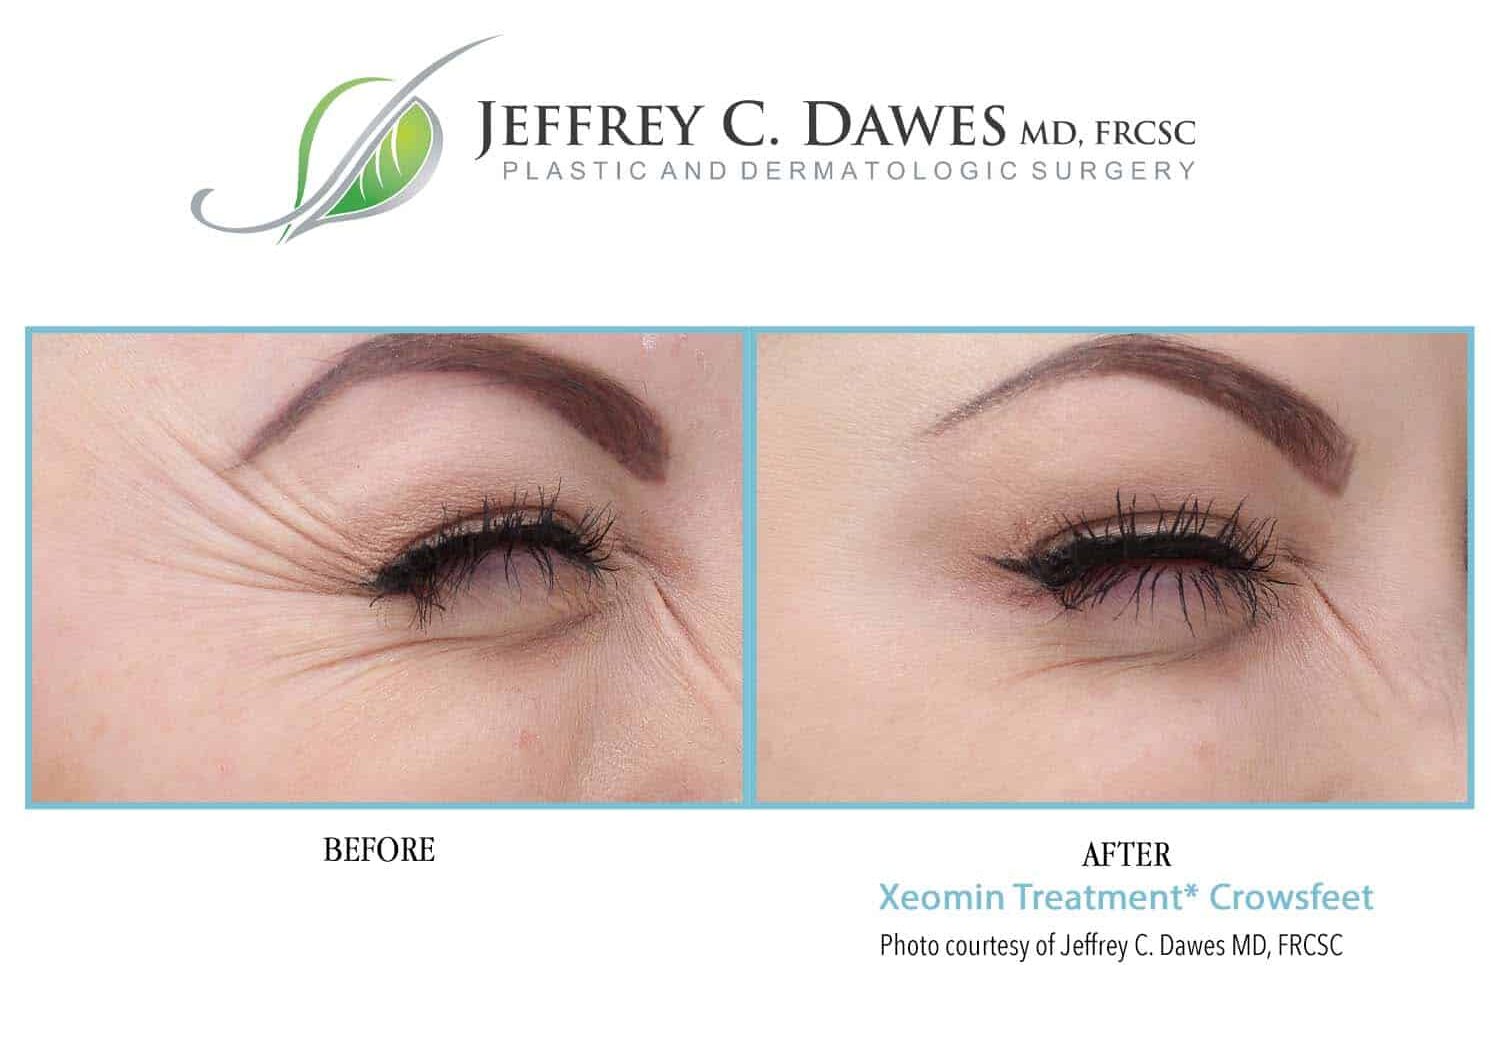 Before: "Pre-Xeomin treatment image showing facial expression lines and wrinkles." After: "Post-Xeomin treatment image displaying reduced facial lines and smoother skin at Jeffrey C. Dawes clinic in Calgary, Alberta.